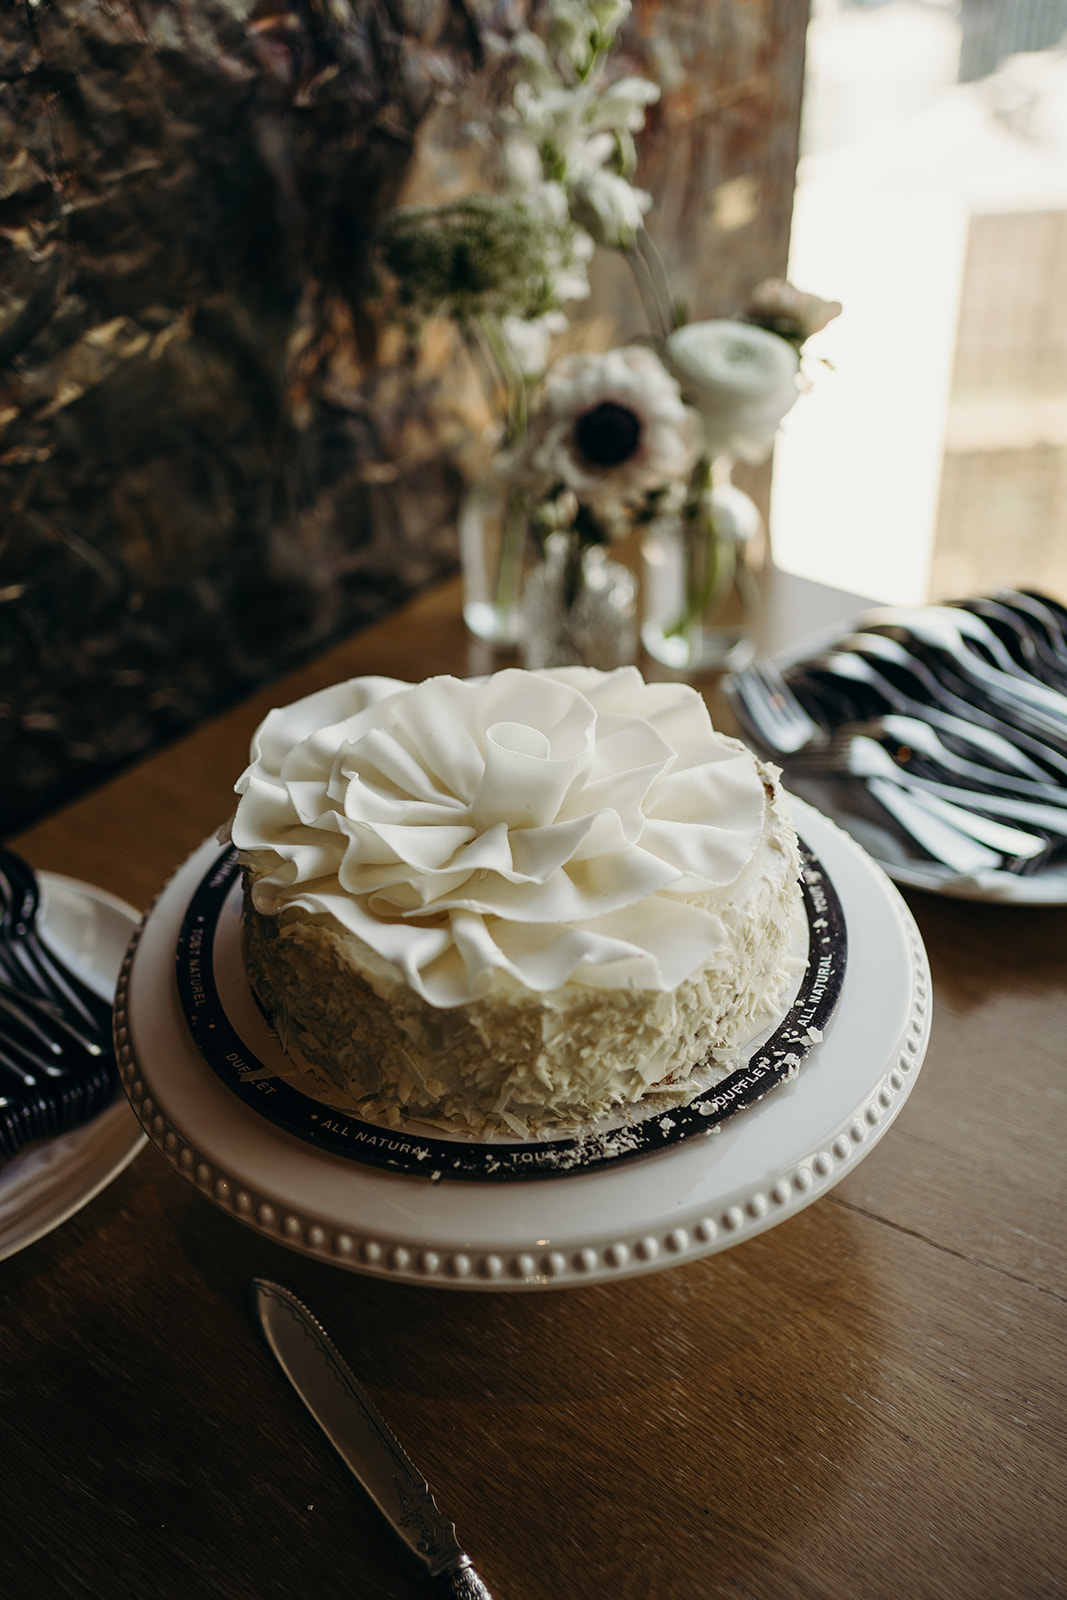 a cake with one white piped-on rose on top.